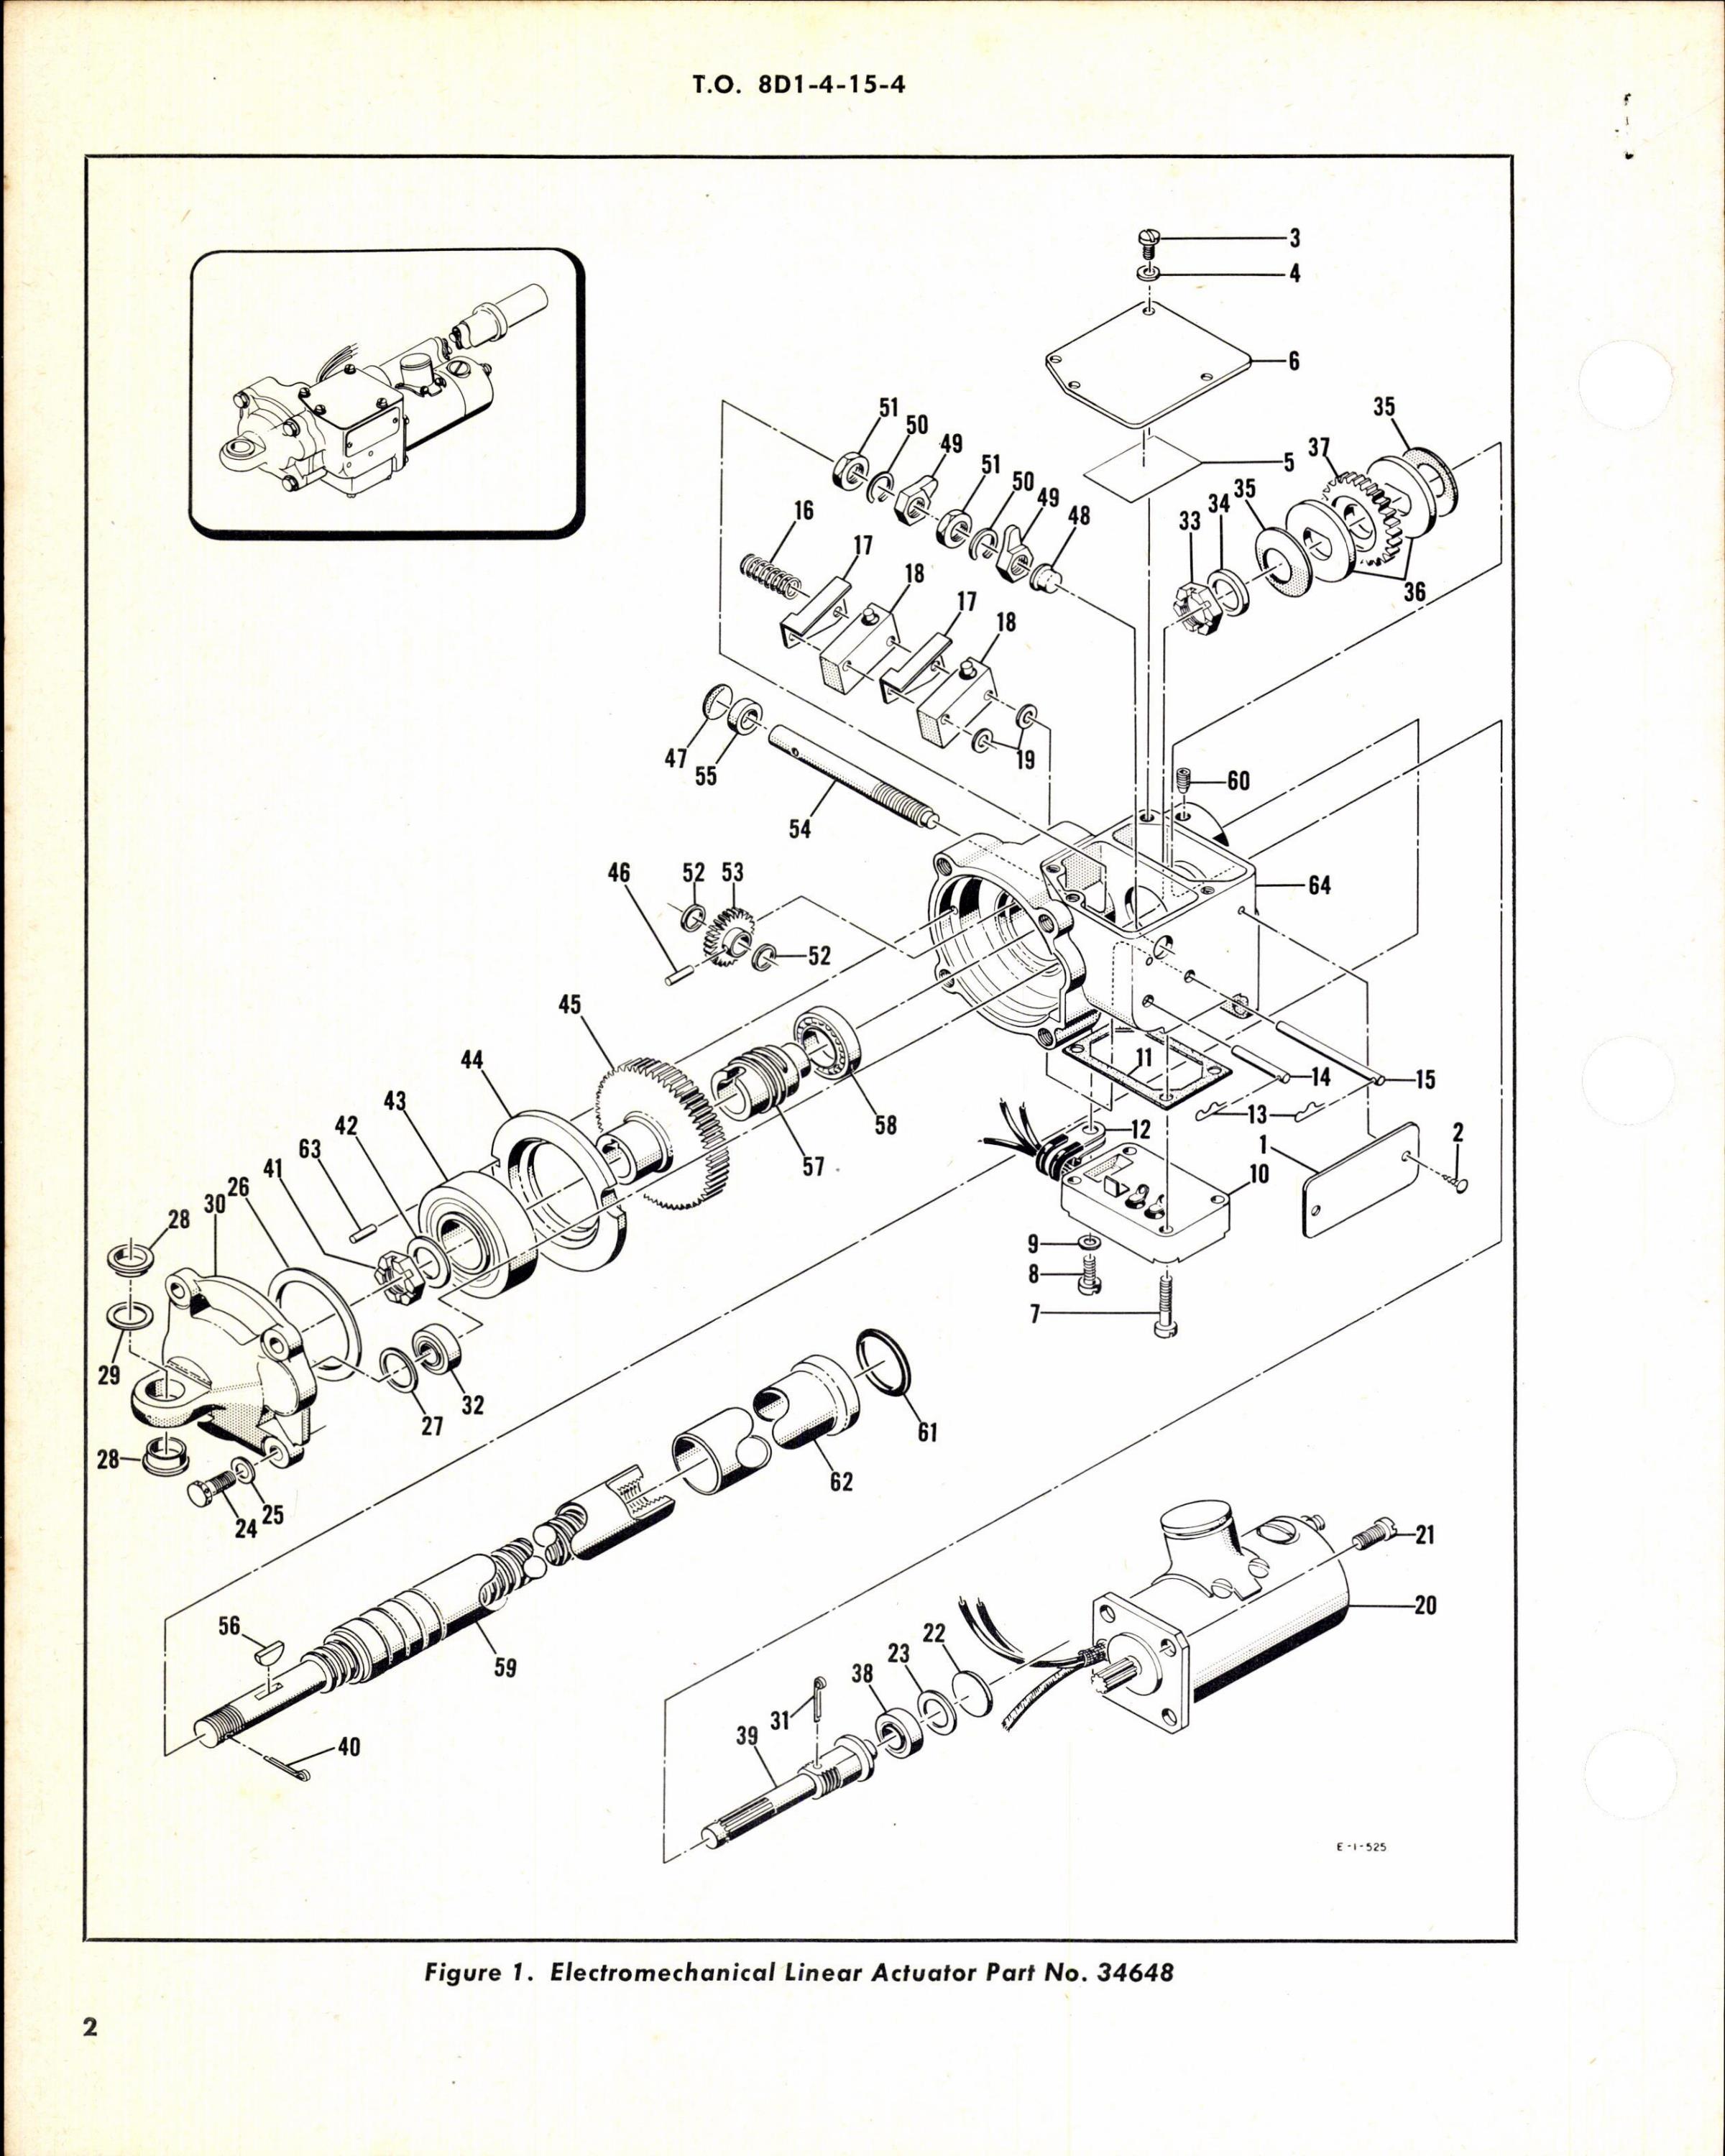 Sample page 2 from AirCorps Library document: Parts Breakdown for Electromechanical Linear Actuator